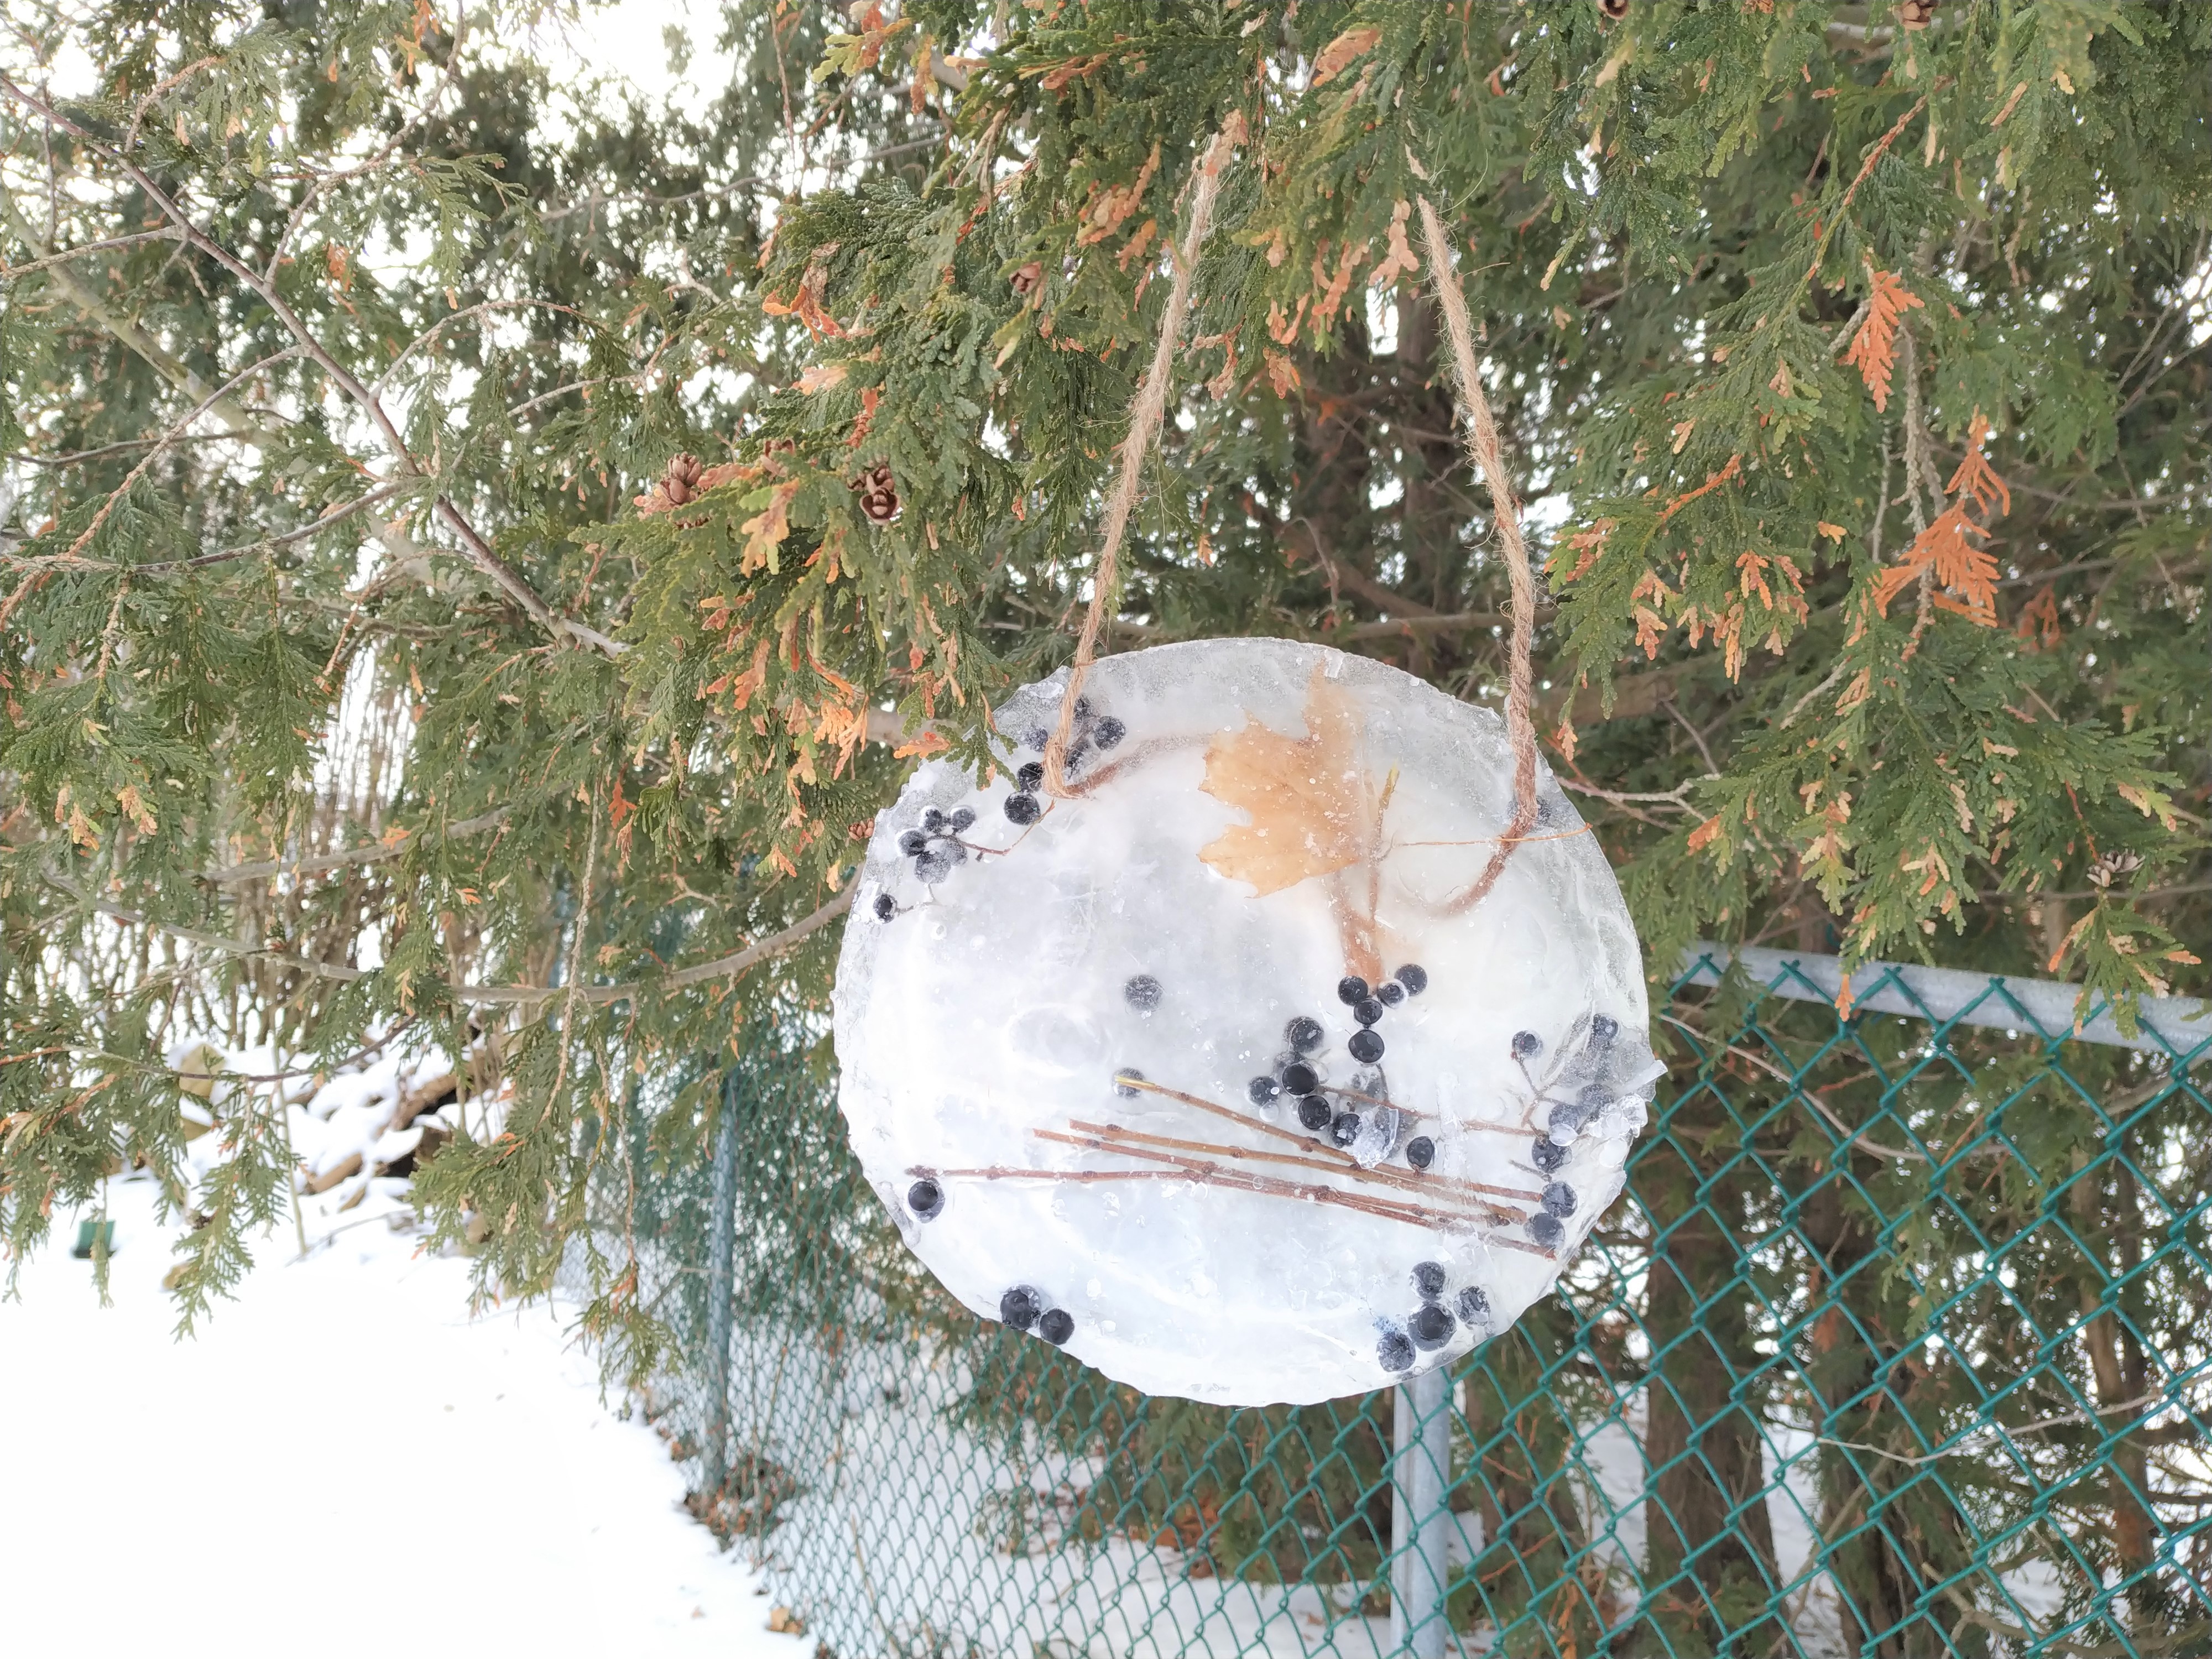 Ice sun catcher hanging from a tree branch.